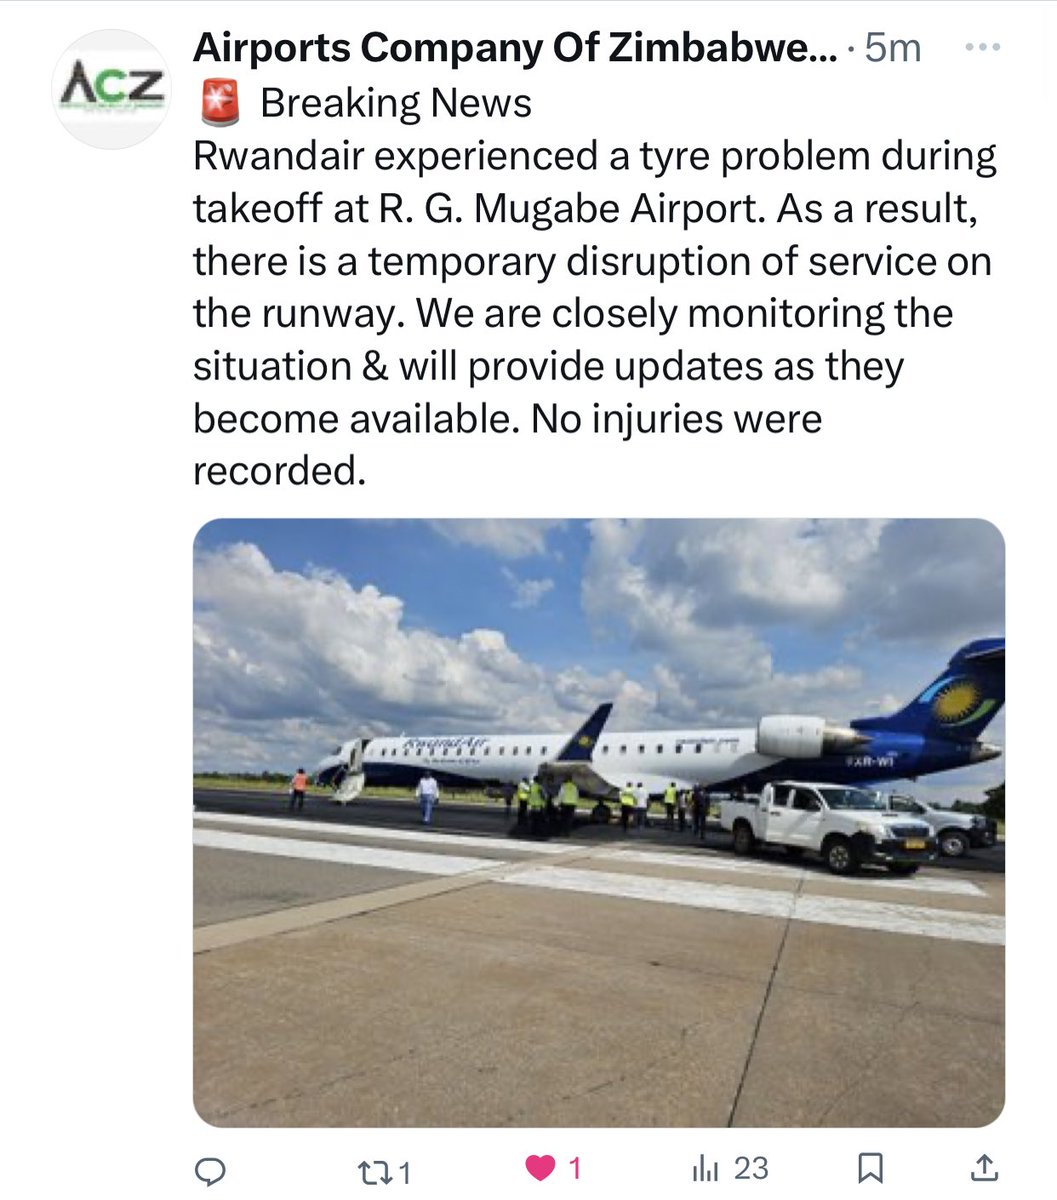 A good reason why a second runway is needed at our major international airport.